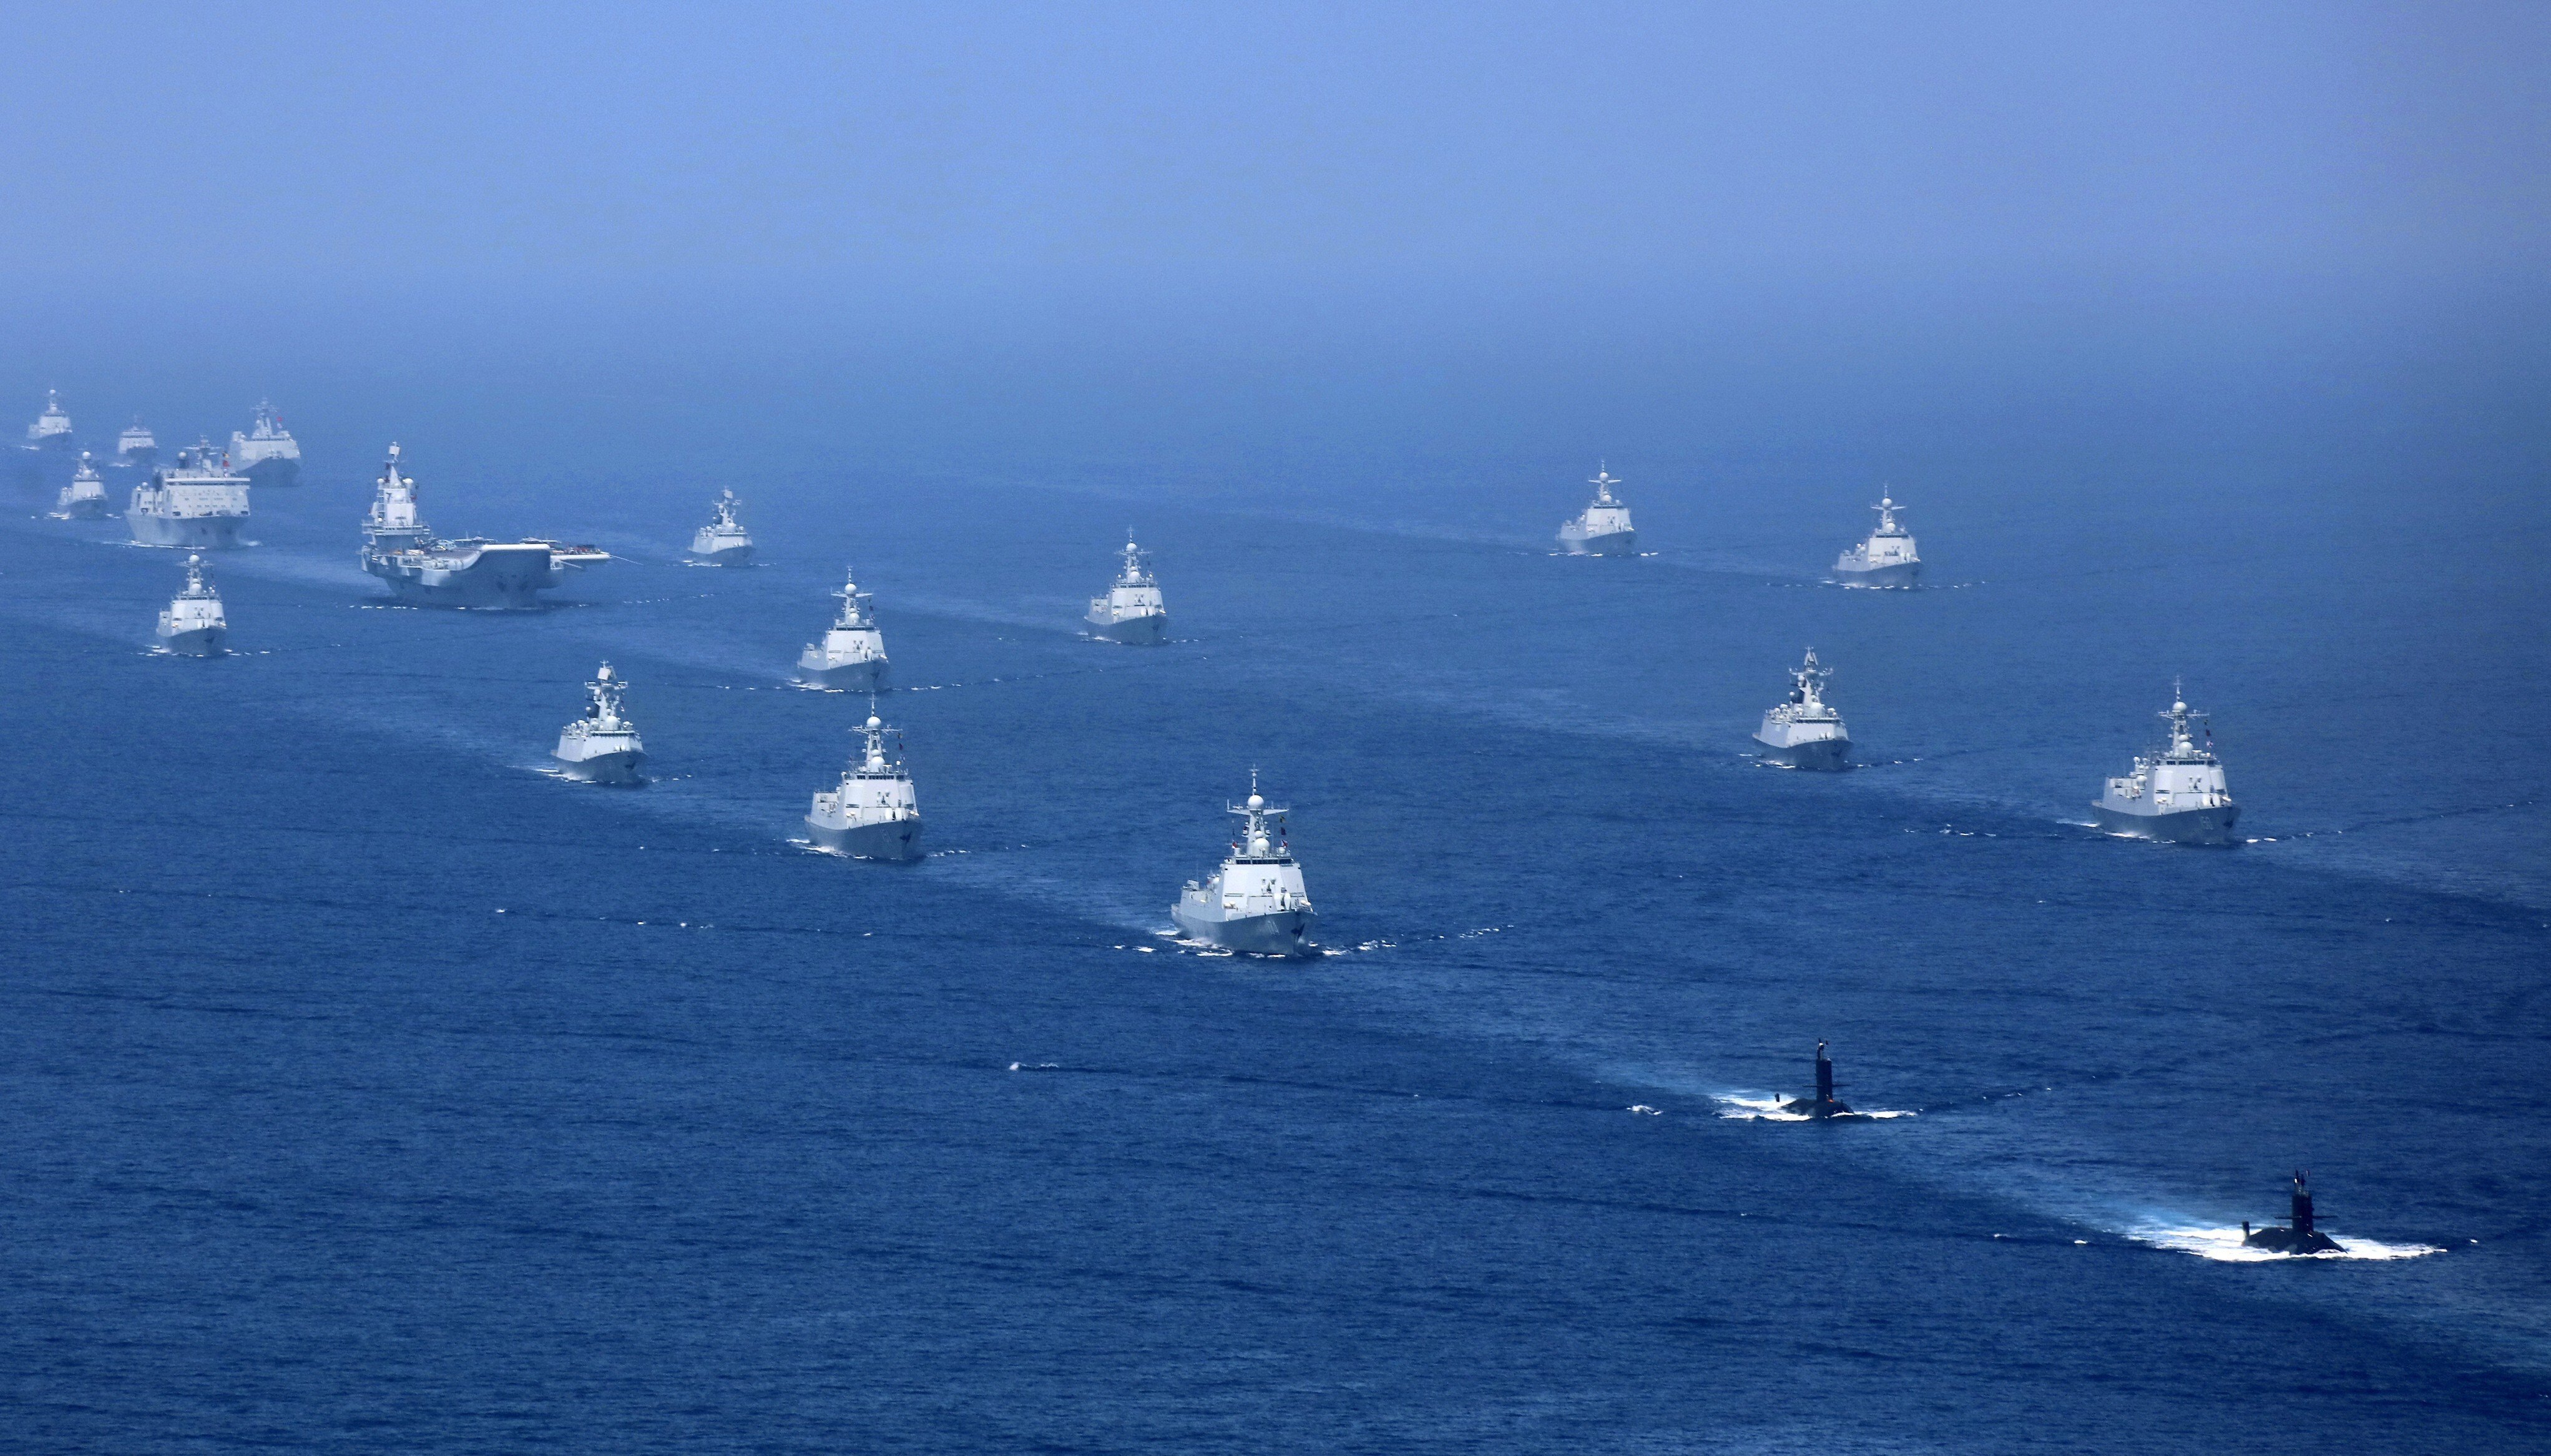 China’s Liaoning aircraft carrier is accompanied by navy frigates and submarines during exercises in the South China Sea. Photo: AP